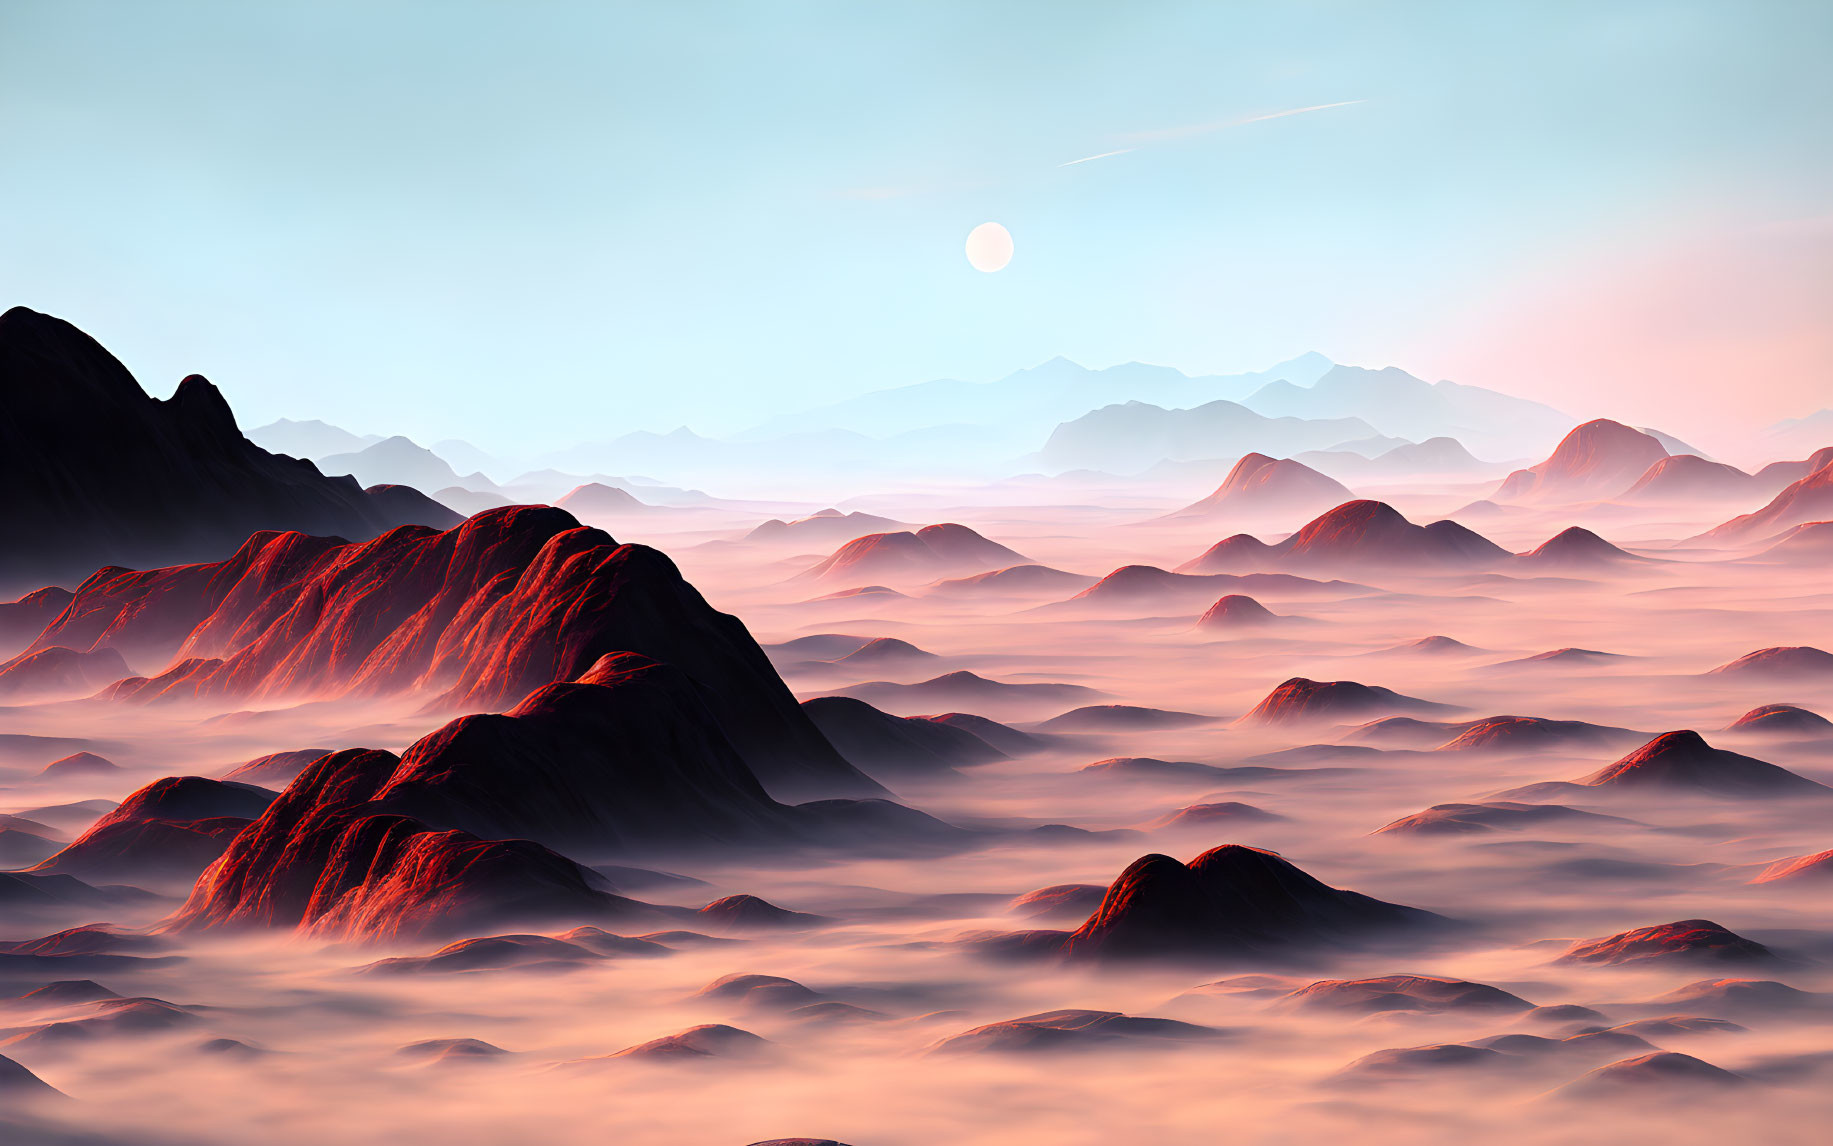 Misty Red Hills and Blue Mountains Under Pink Sky